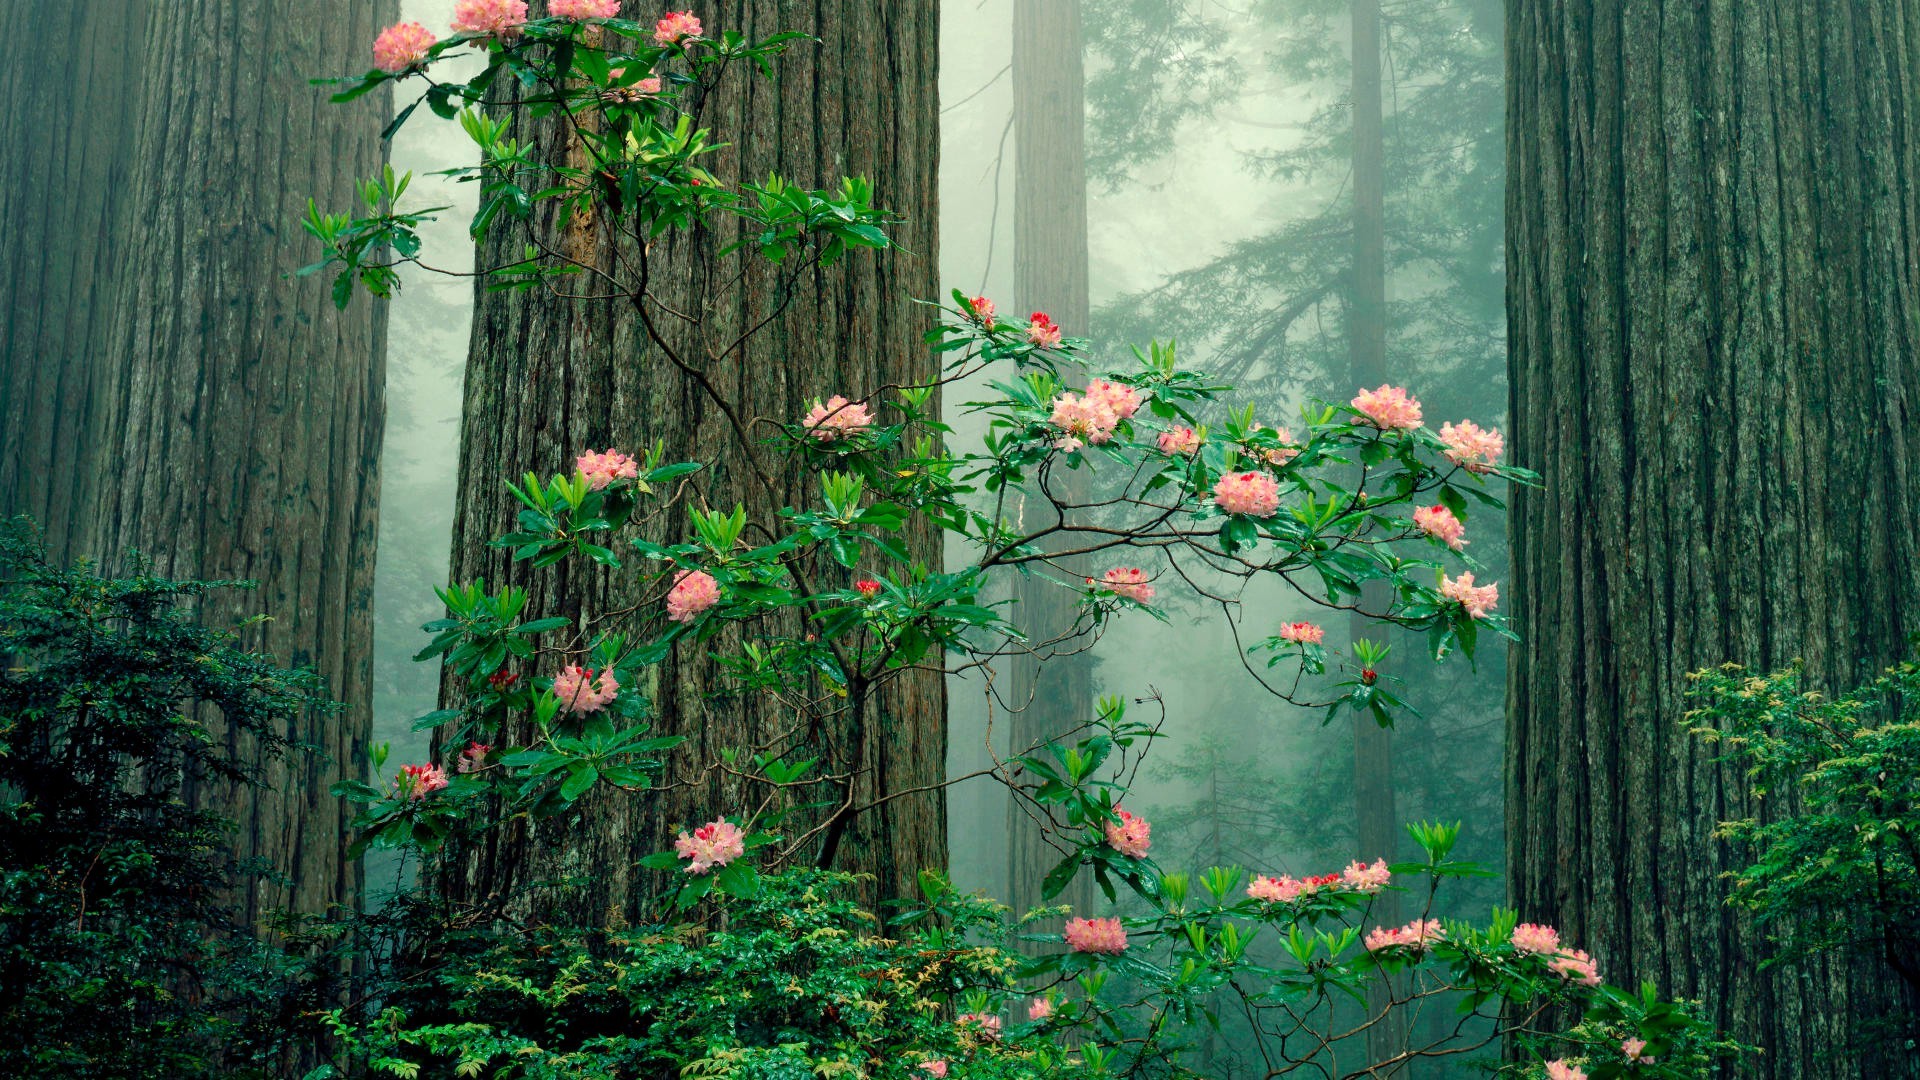 The Bush wild roses in the forest - Android wallpapers